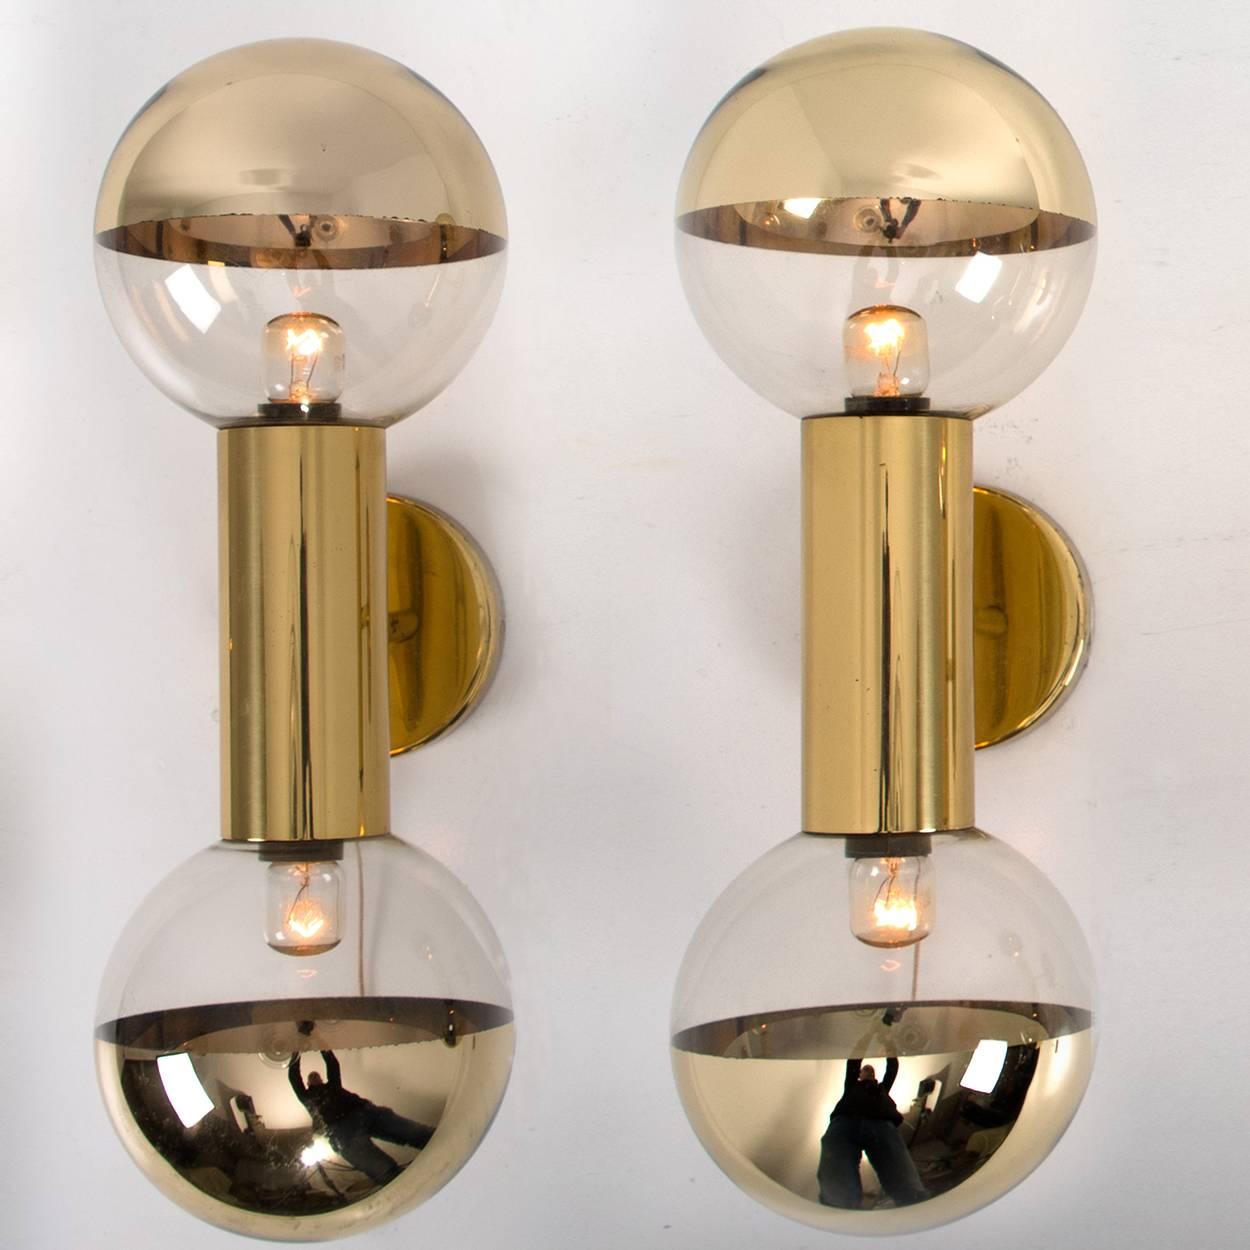 Mid-Century Modern Pair of Brass Wall Lamps or Wall Scones by Motoko Ishii for Staff, 1970s